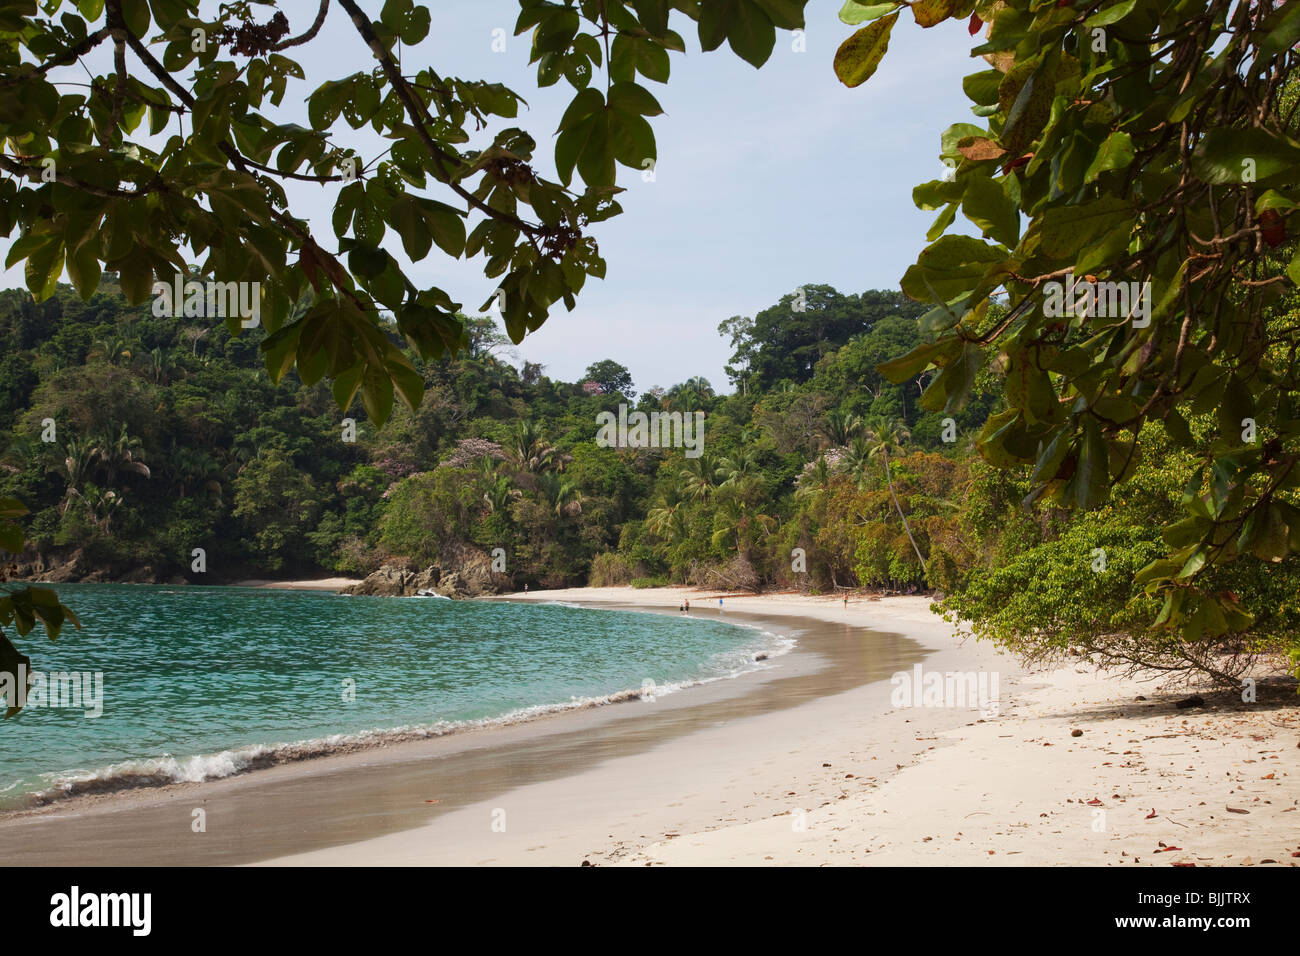 Tropical beach and bay with flowering tropical rainforest trees and people on beach Manuel Antonio national park costa rica Stock Photo